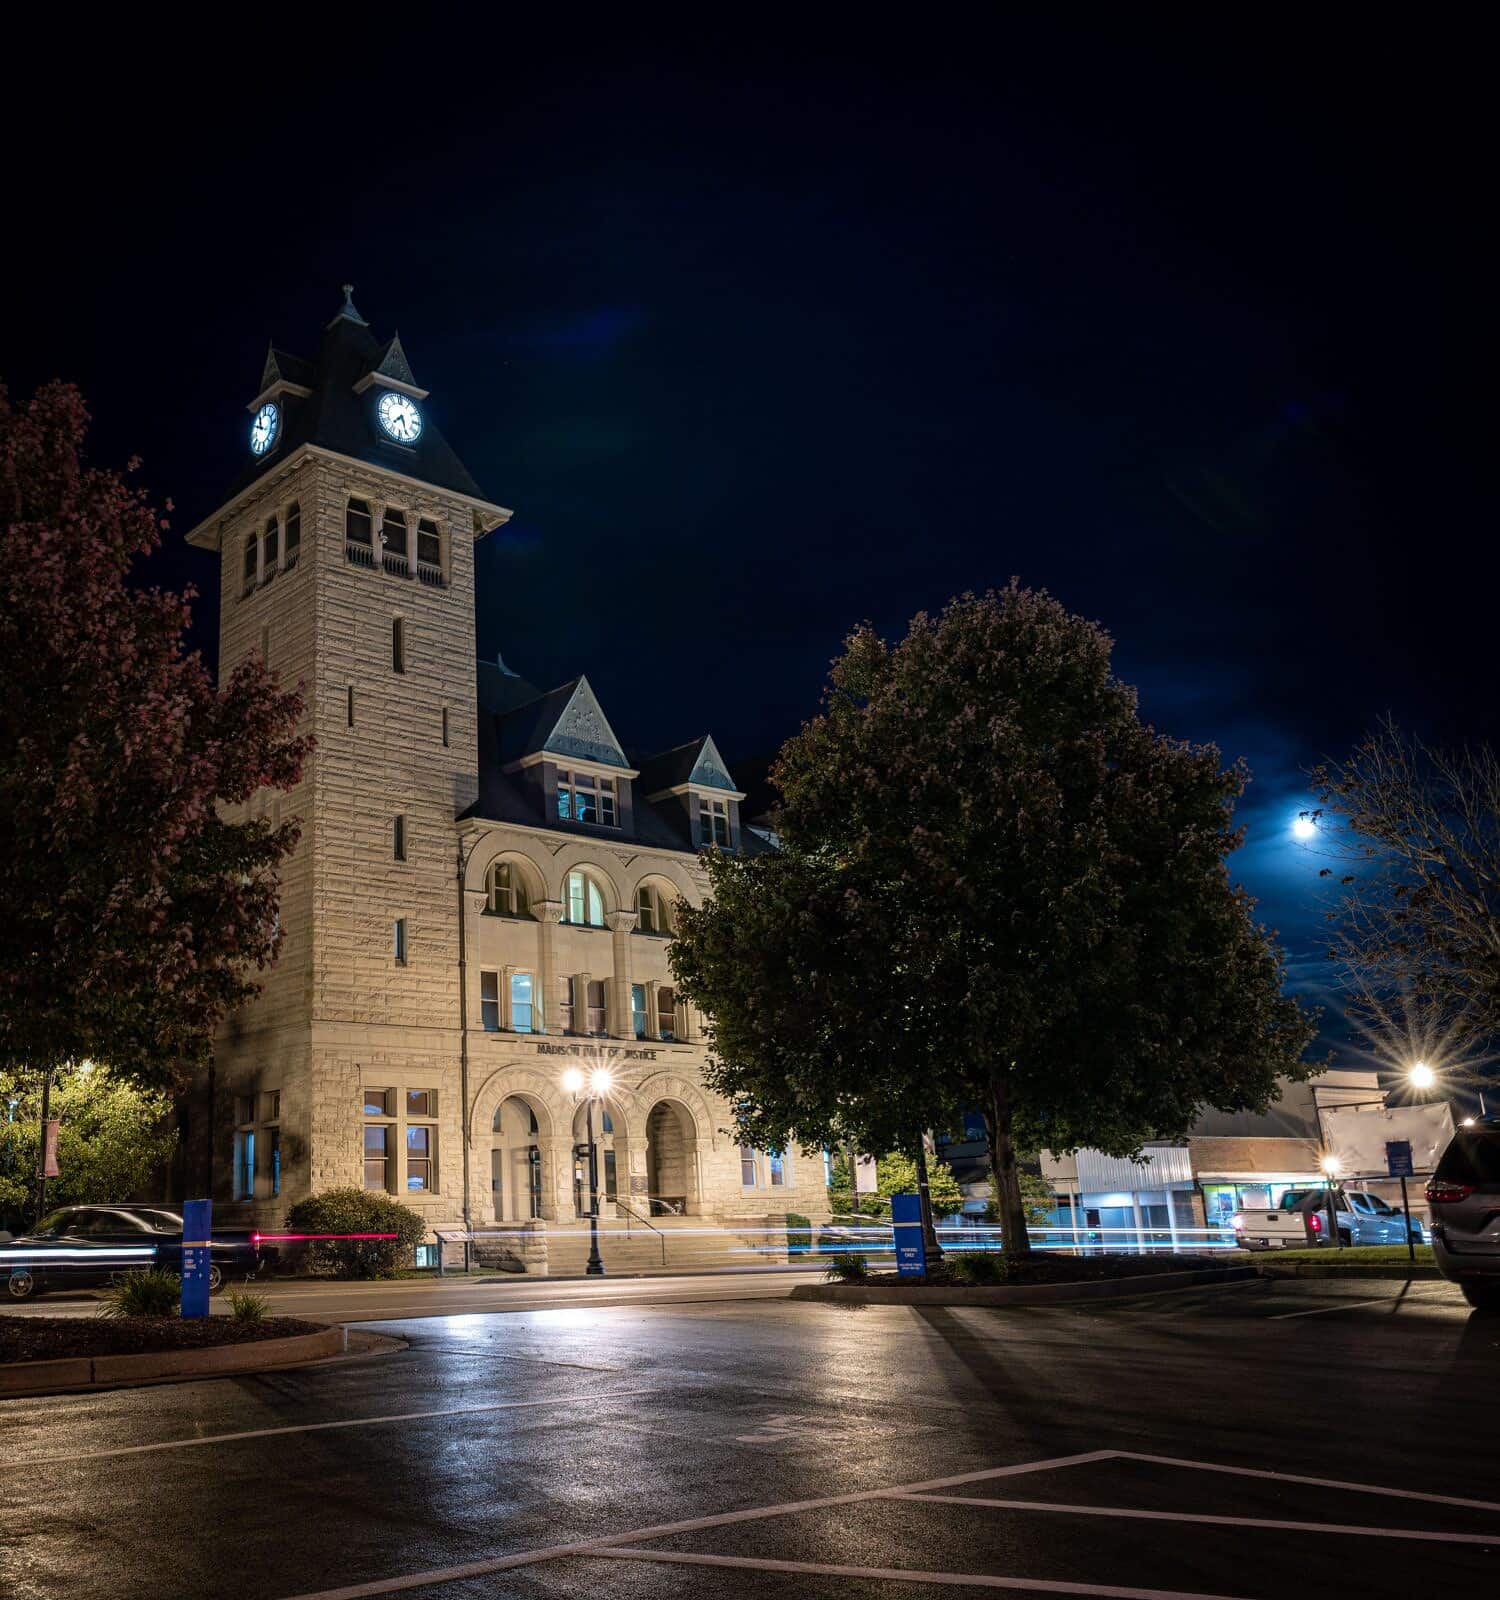 Richmond, Kentucky's Madison County courthouse at night with a full moon behind it and evening traffic crossing in front of the building